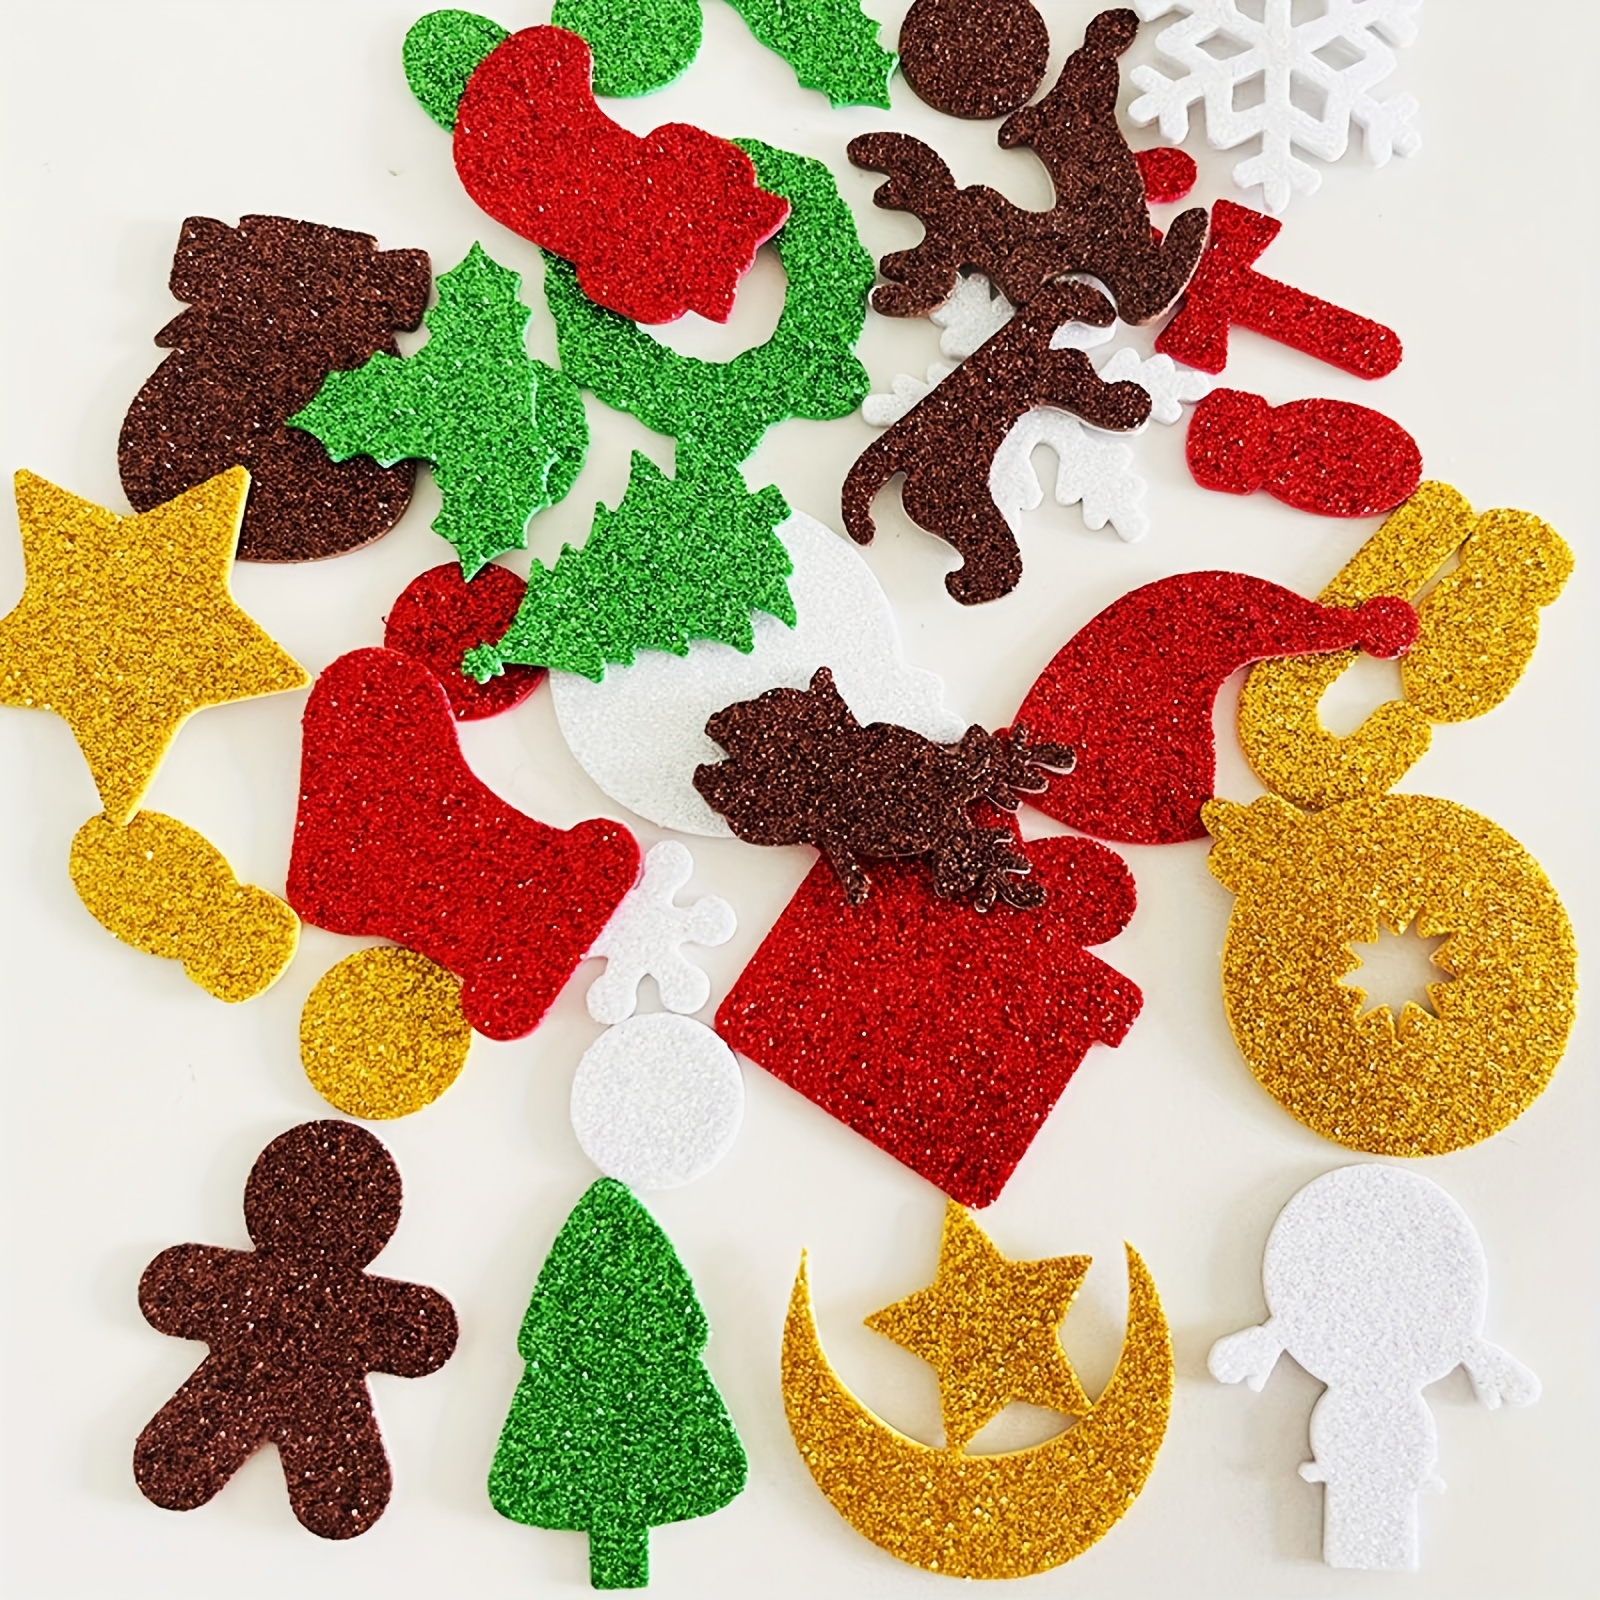 A wide variety of Art Star Christmas EVA Foam Stickers with